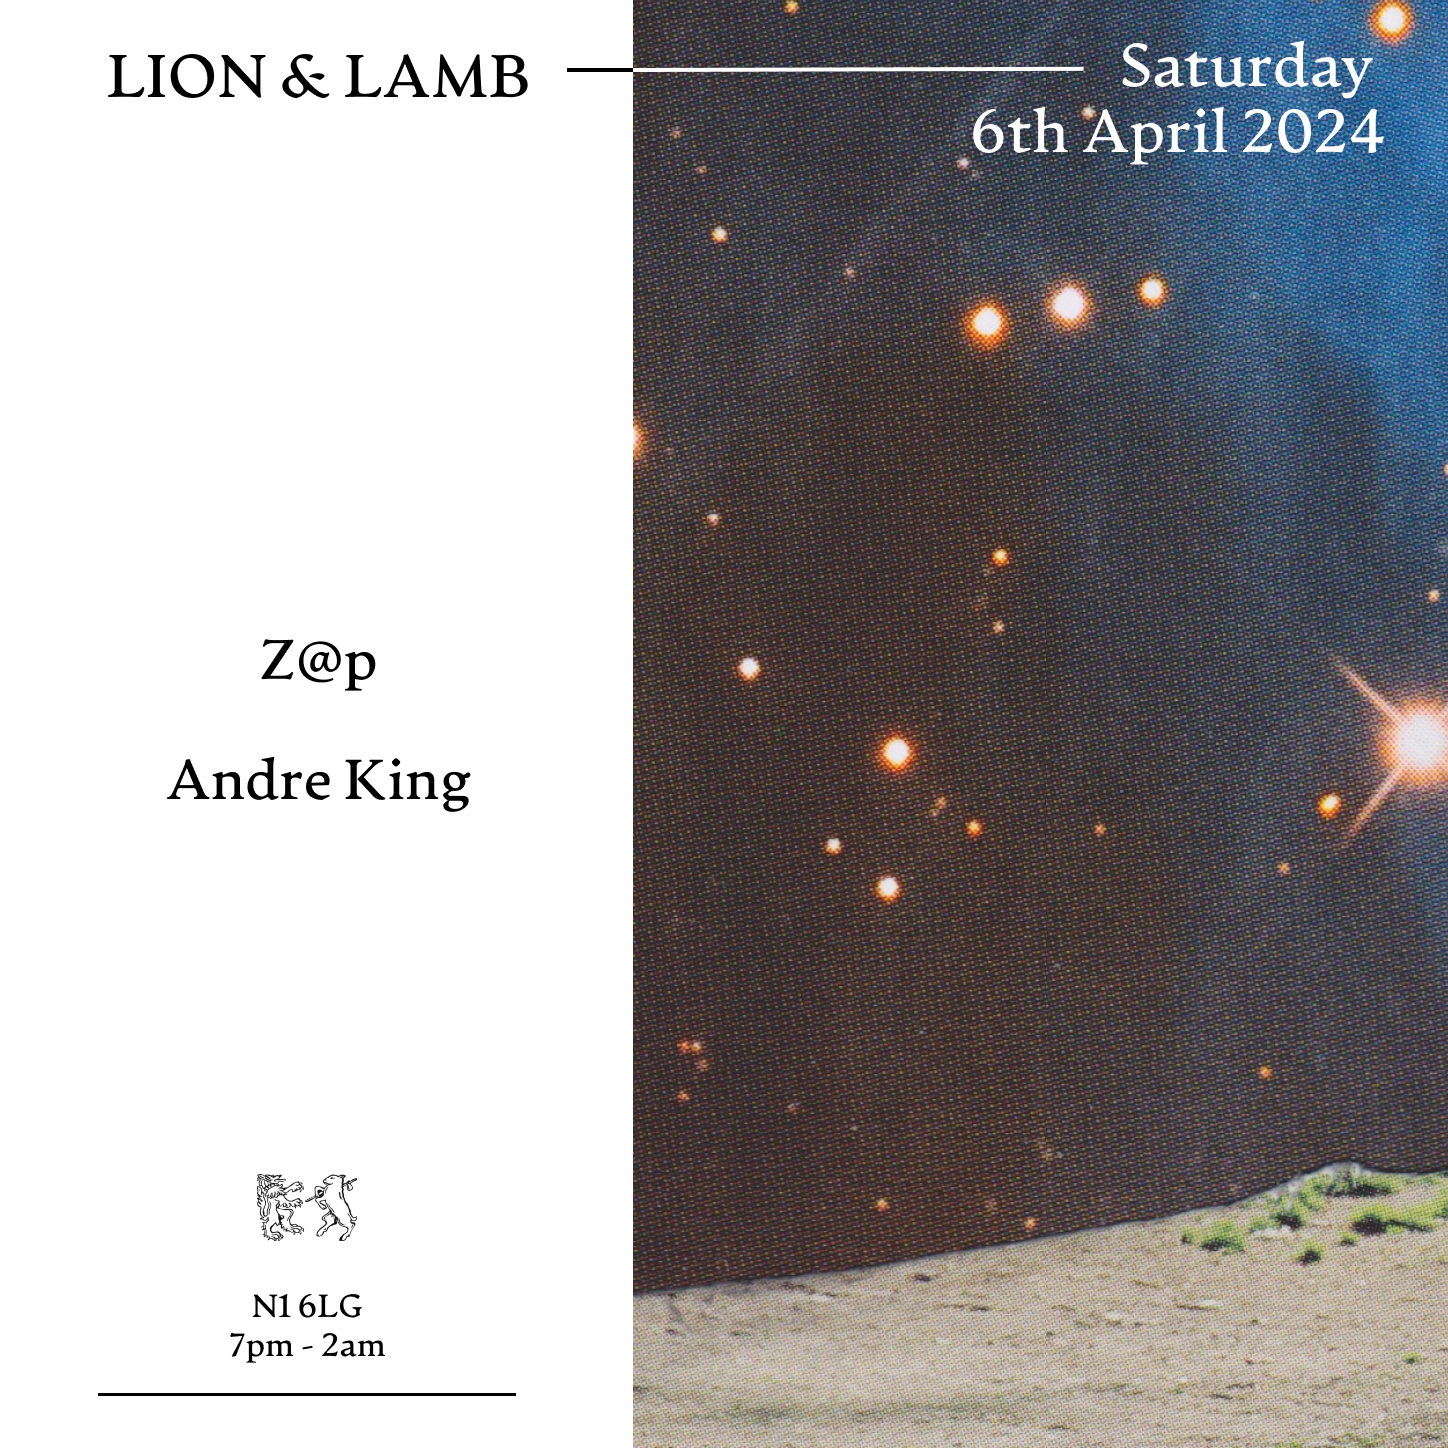 Lion & Lamb with Z@p + Andre King - Página frontal